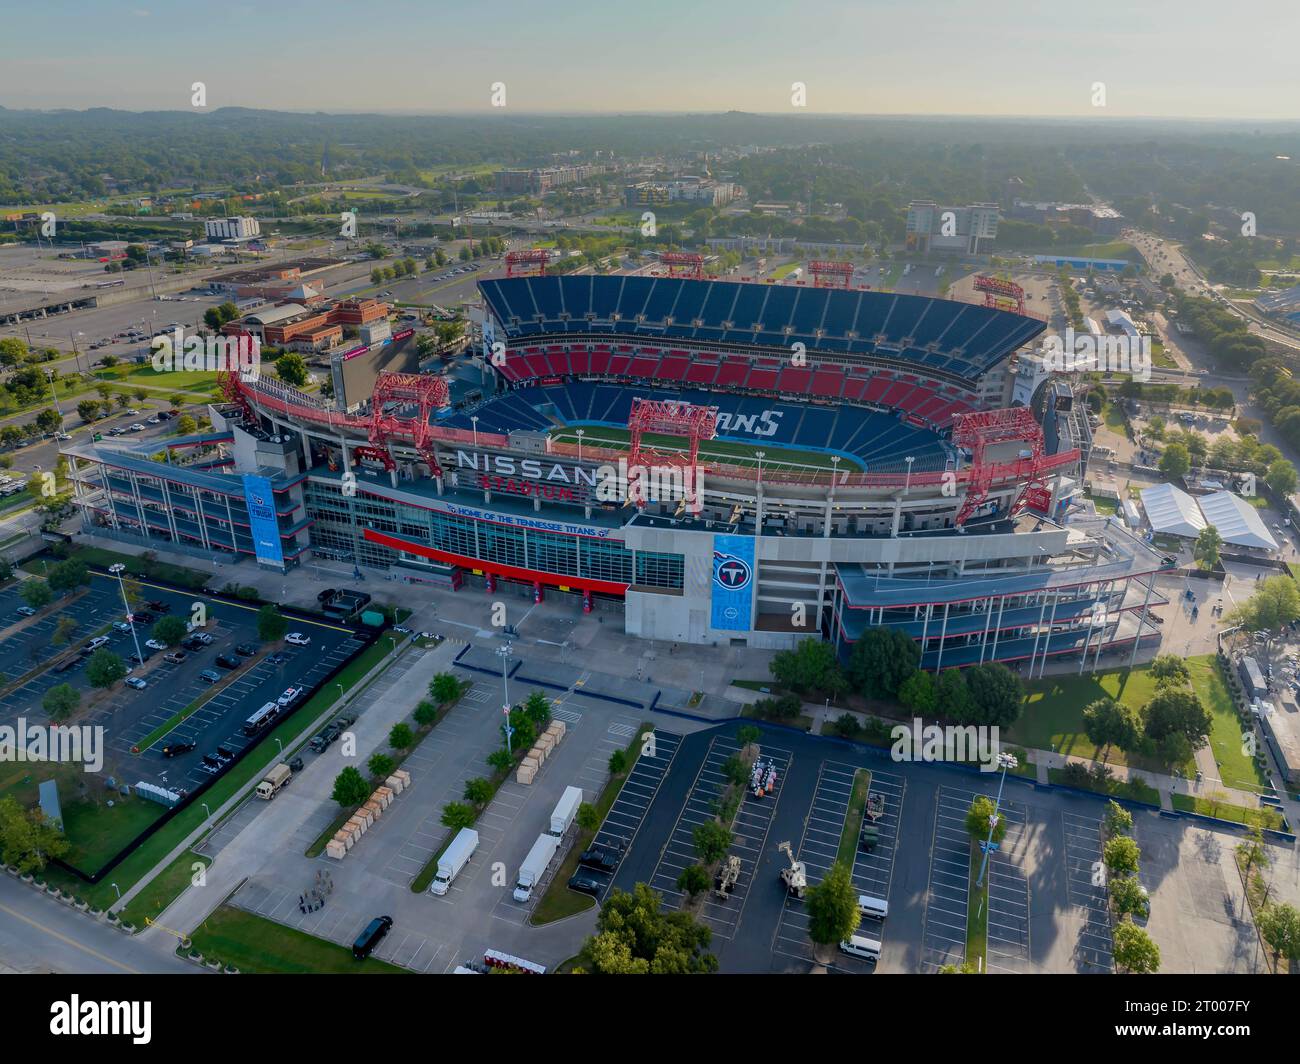 Aerial View Of Nissan Stadium, Home Of The National Football Leagues Tennessee Titans Stock Photo